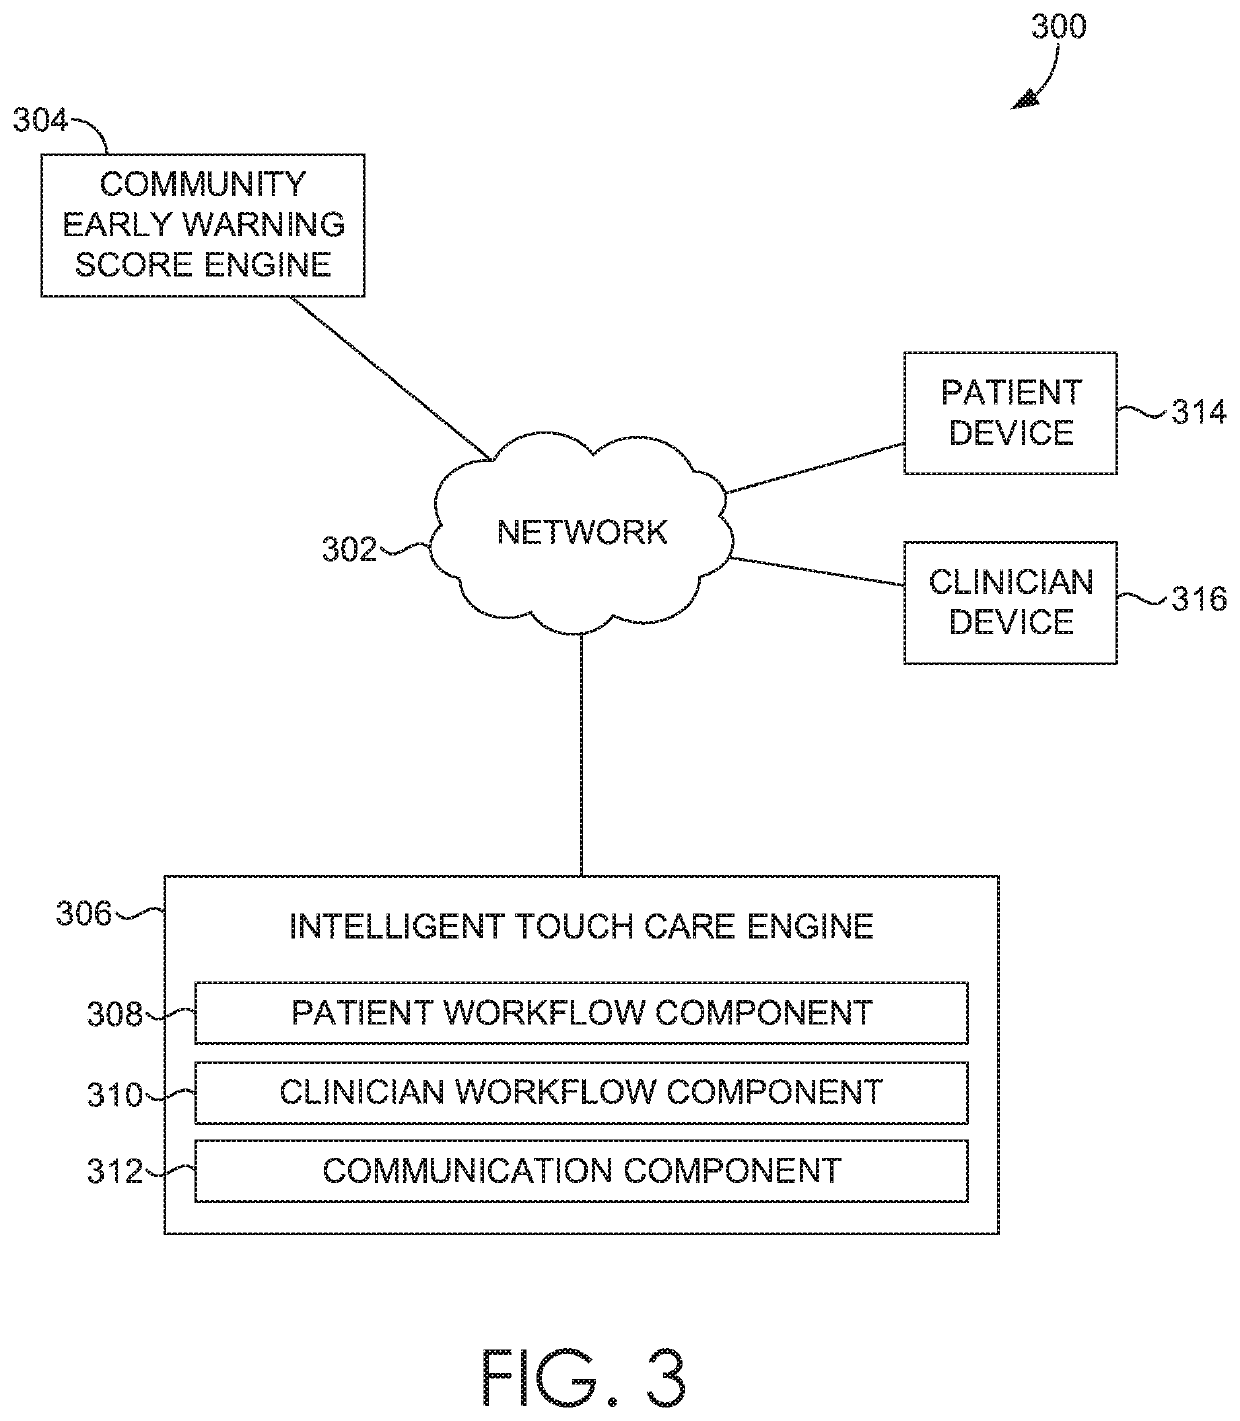 Intelligent touch care corresponding to a patient question